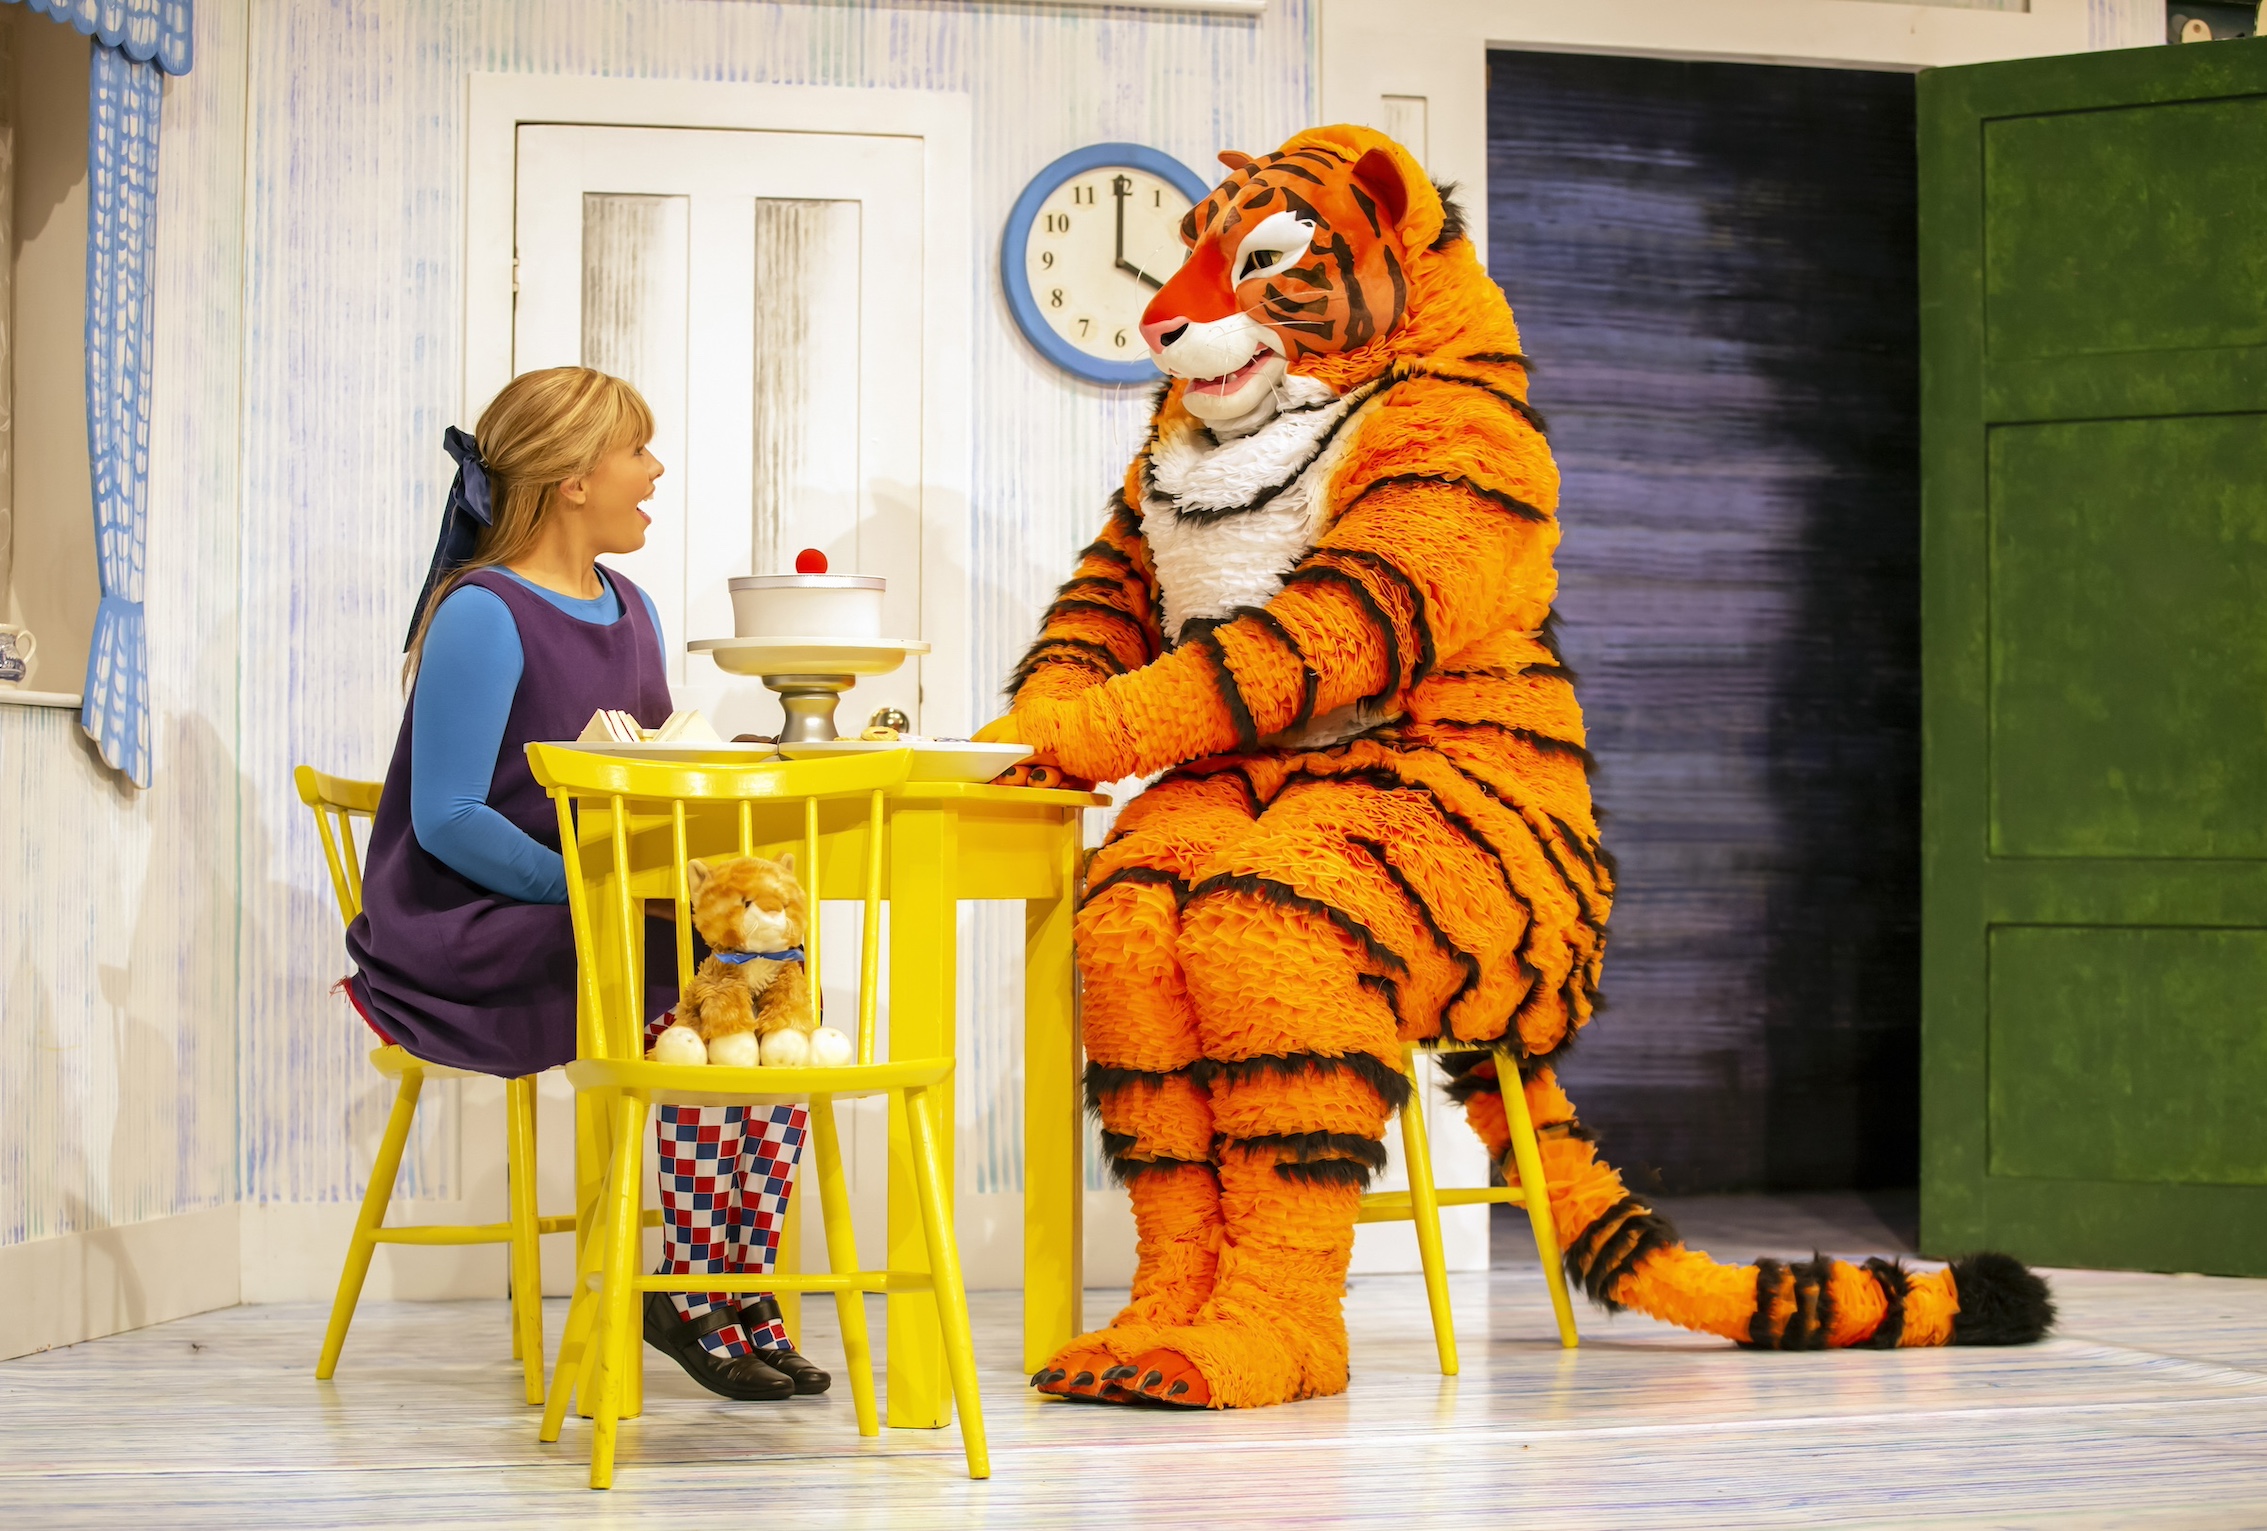 Tiger and girl at stage performance of the tiger who came to tea